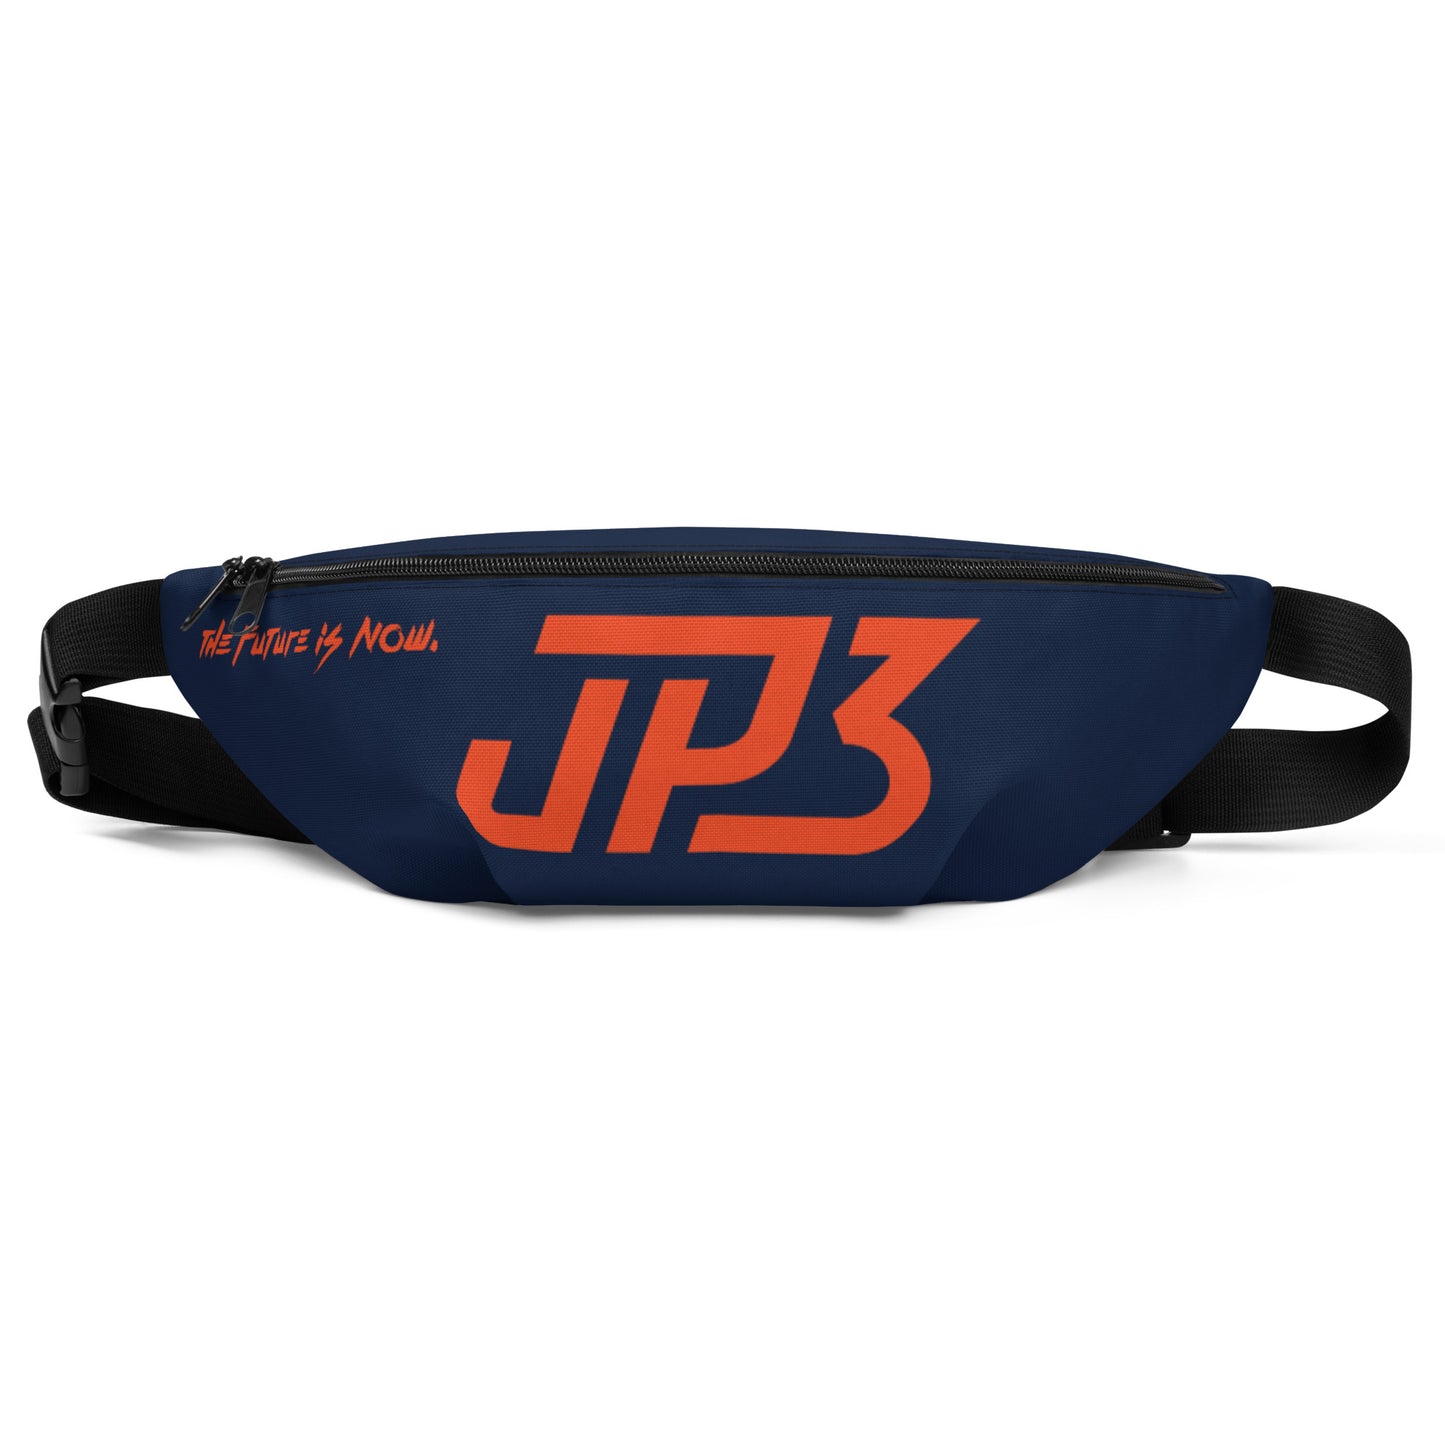 JP3: THE FUTURE IS NOW. Fanny Pack